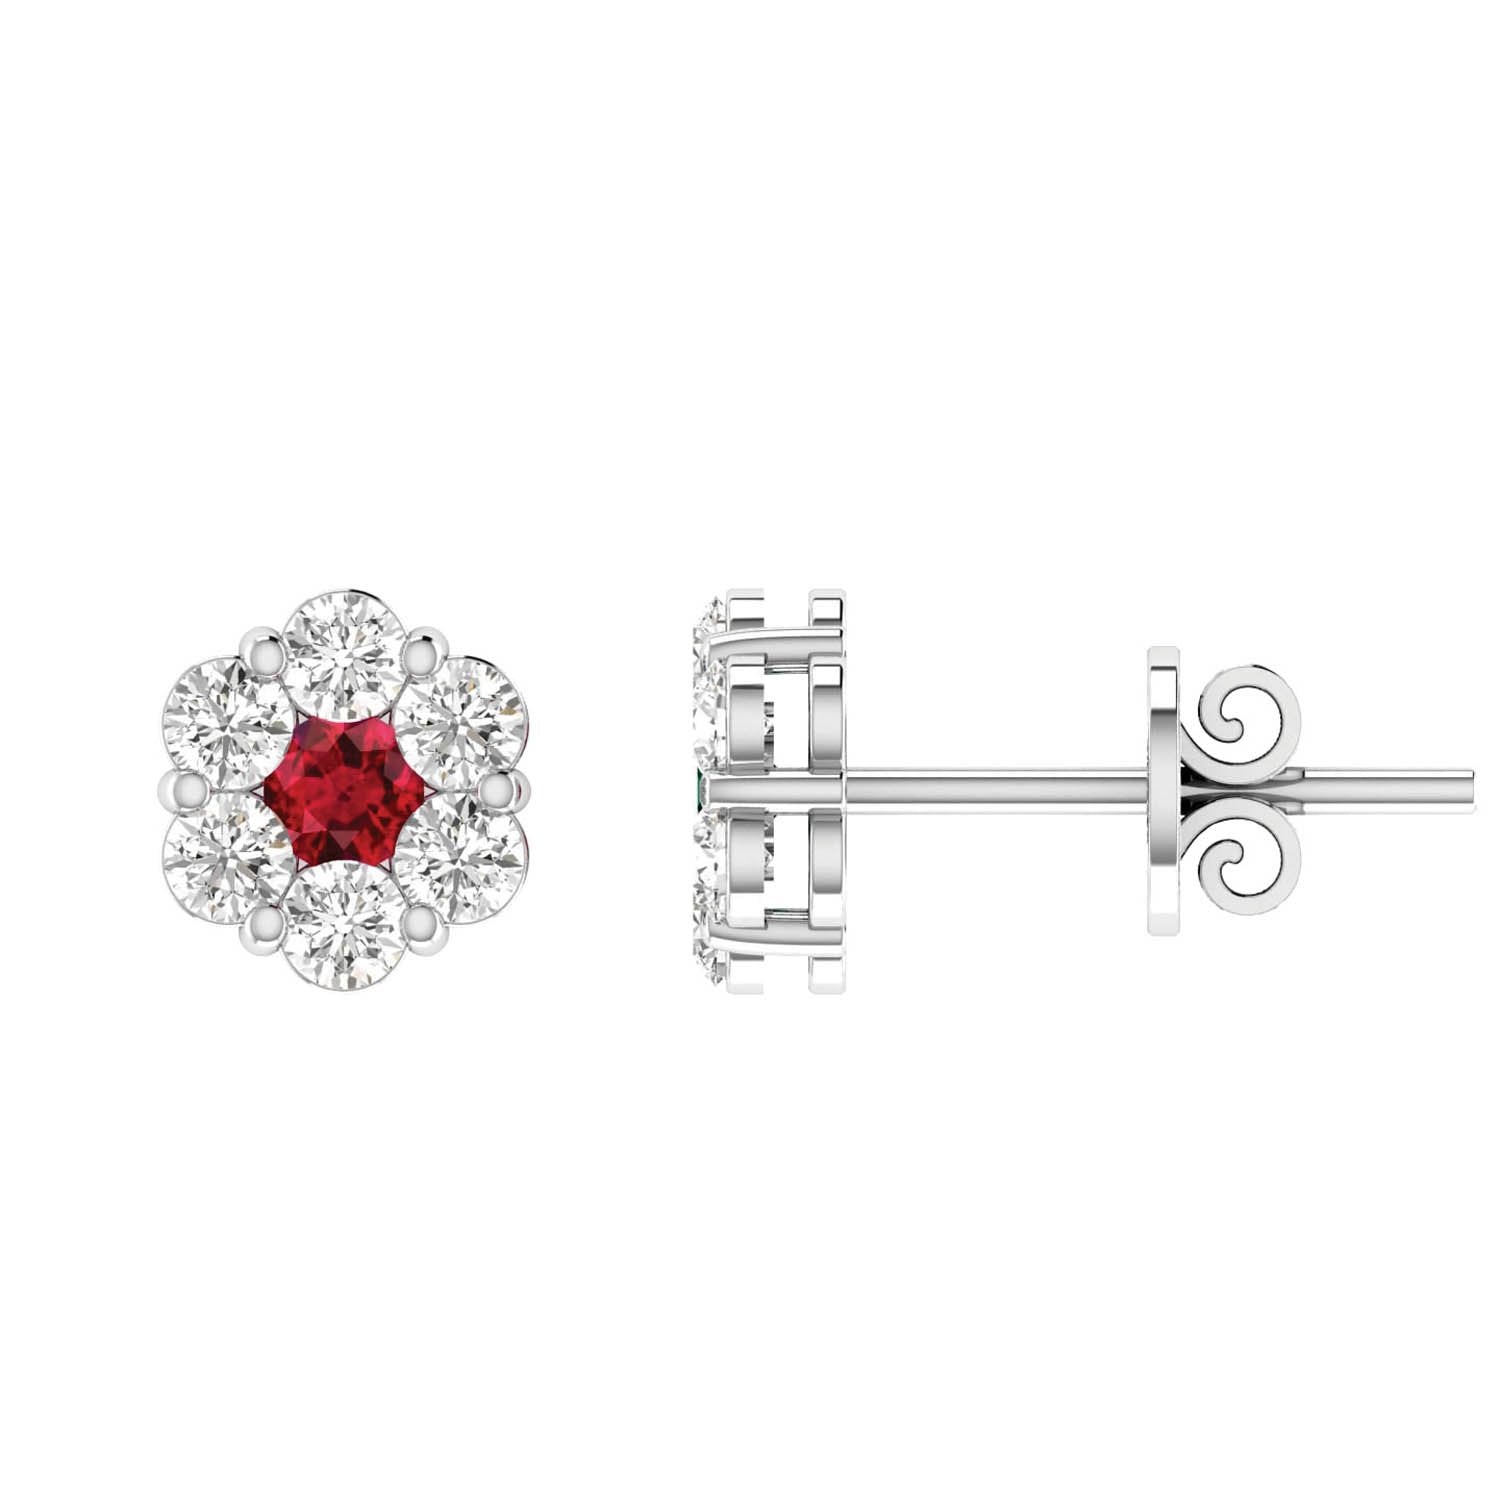 Ruby Diamond Earrings with 0.19ct Diamonds in 9K White Gold - 9WRE25GHR